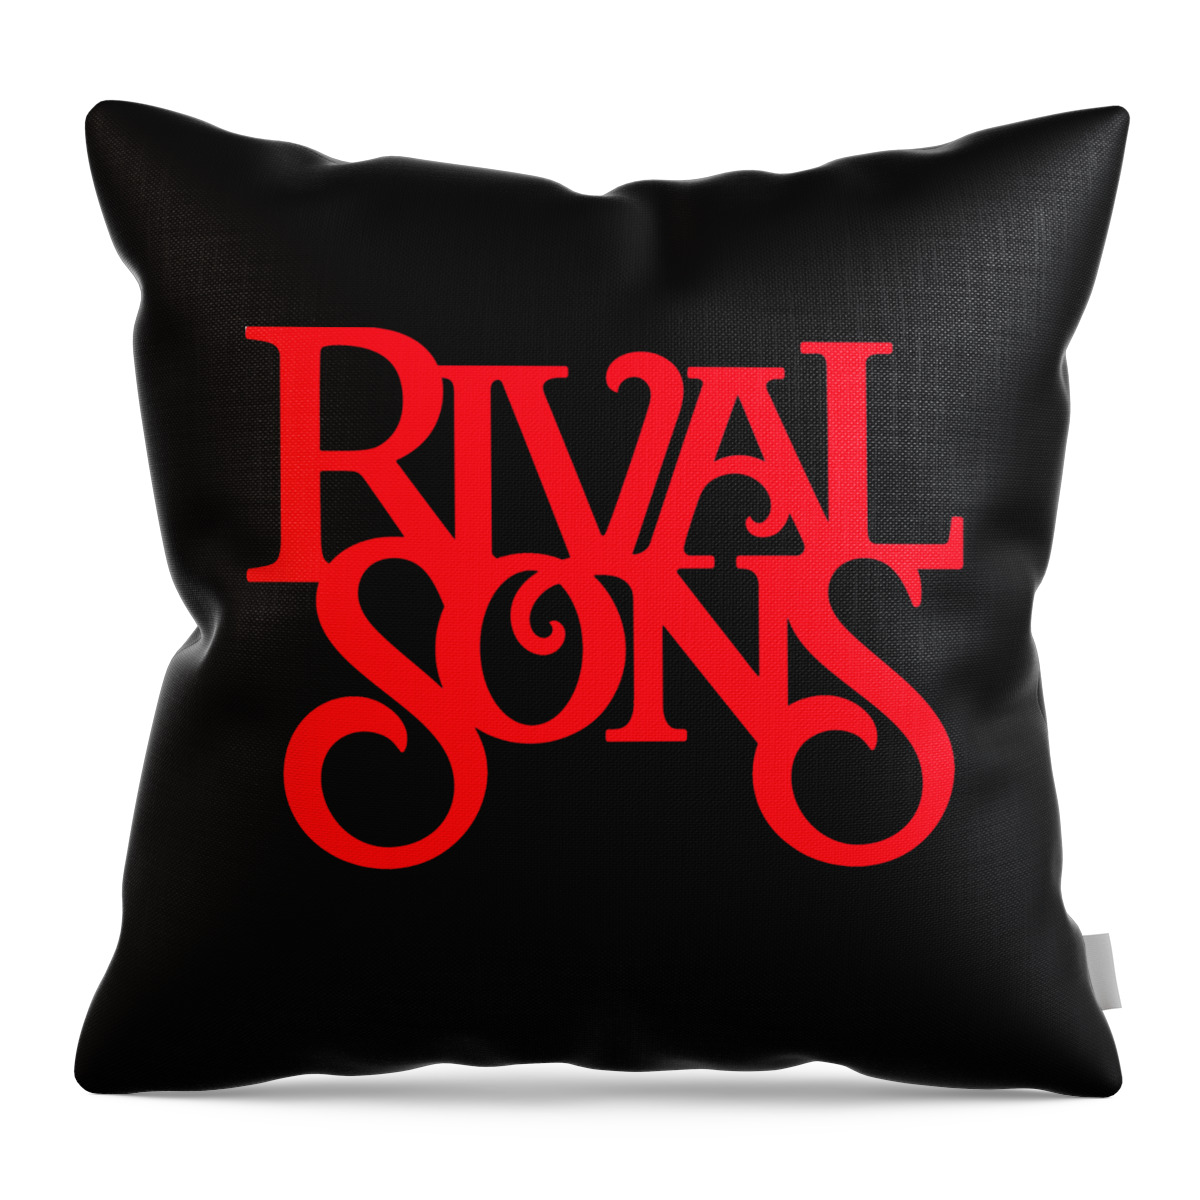 Funny Throw Pillow featuring the digital art Rival Sons Band #1 by Muspratt Giraud